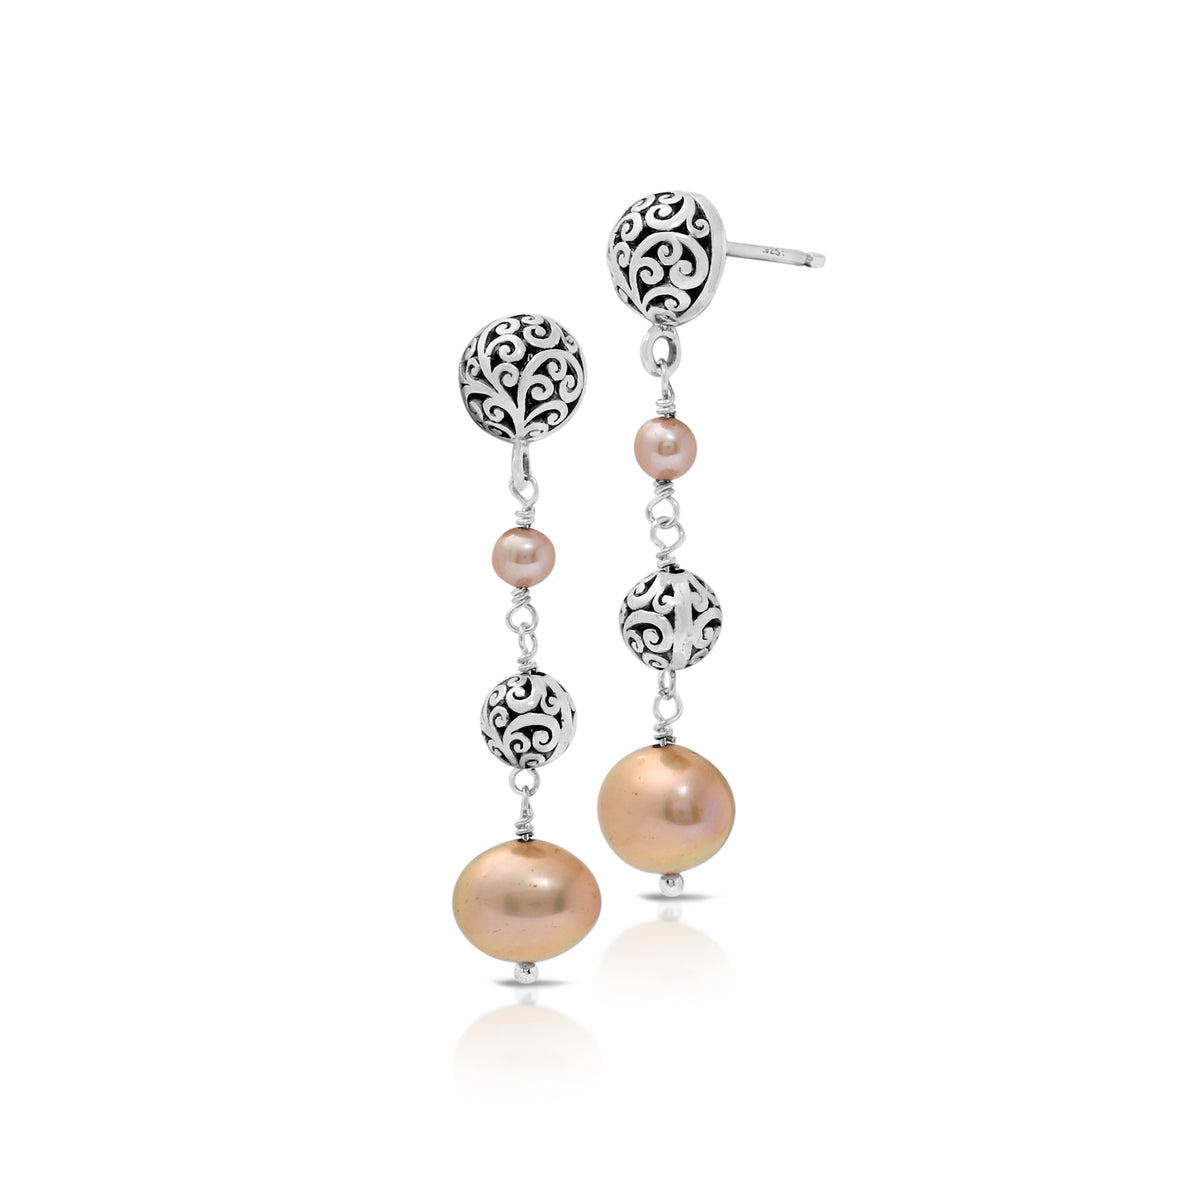 Peach Pearl (10mm) Beads with LH Scroll Bead Vertical Post Earrings